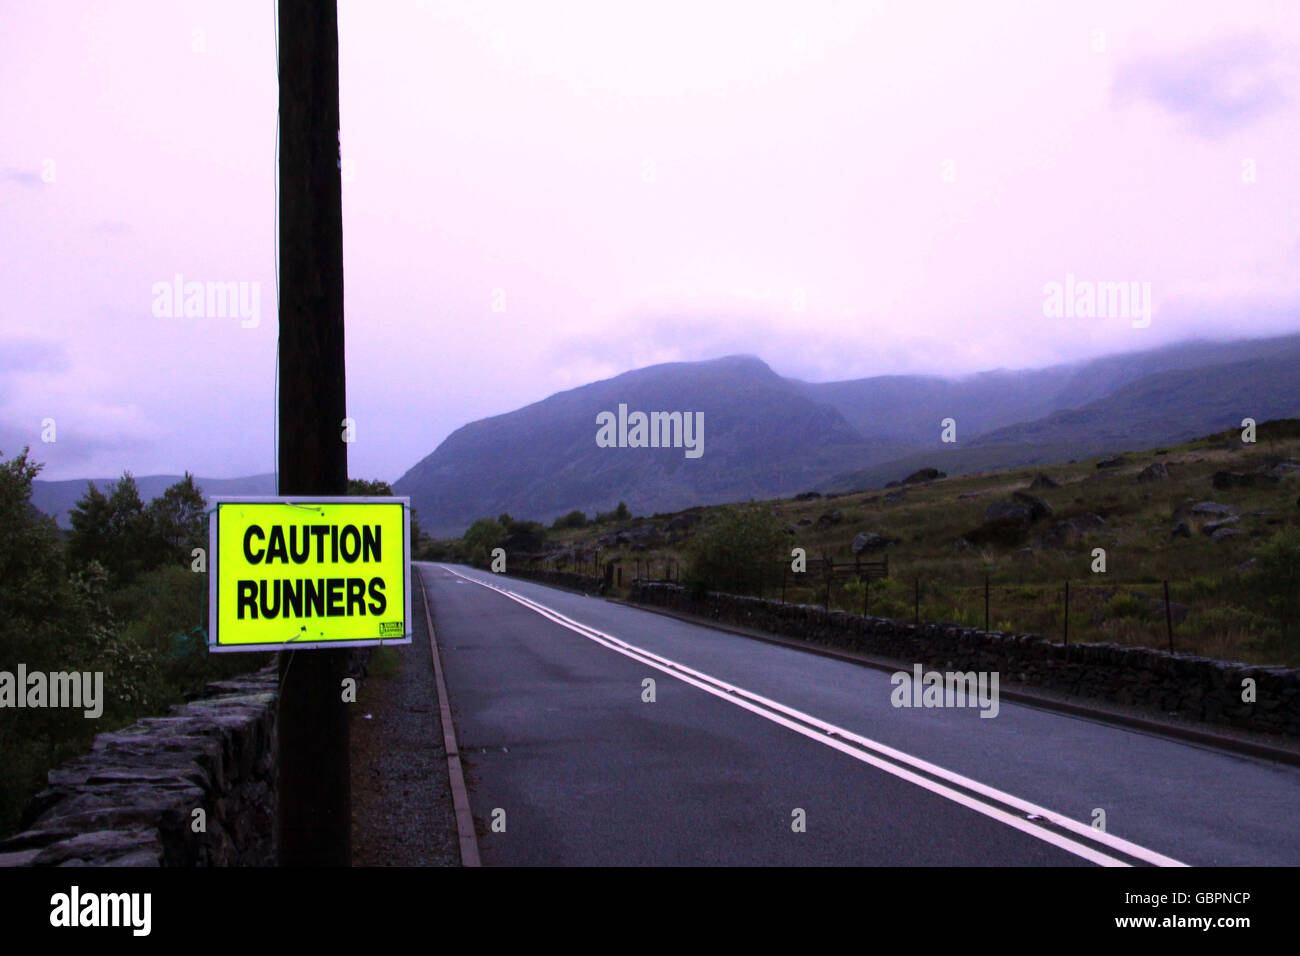 A sign on the main A5 road through Ogwen Valley warning drivers of runners crossing the road to their next climb as the RAF Mountain Rescue team search for runners who got caught up in treacherous weather during a fell race in the Snowdonia region in North Wales. Stock Photo